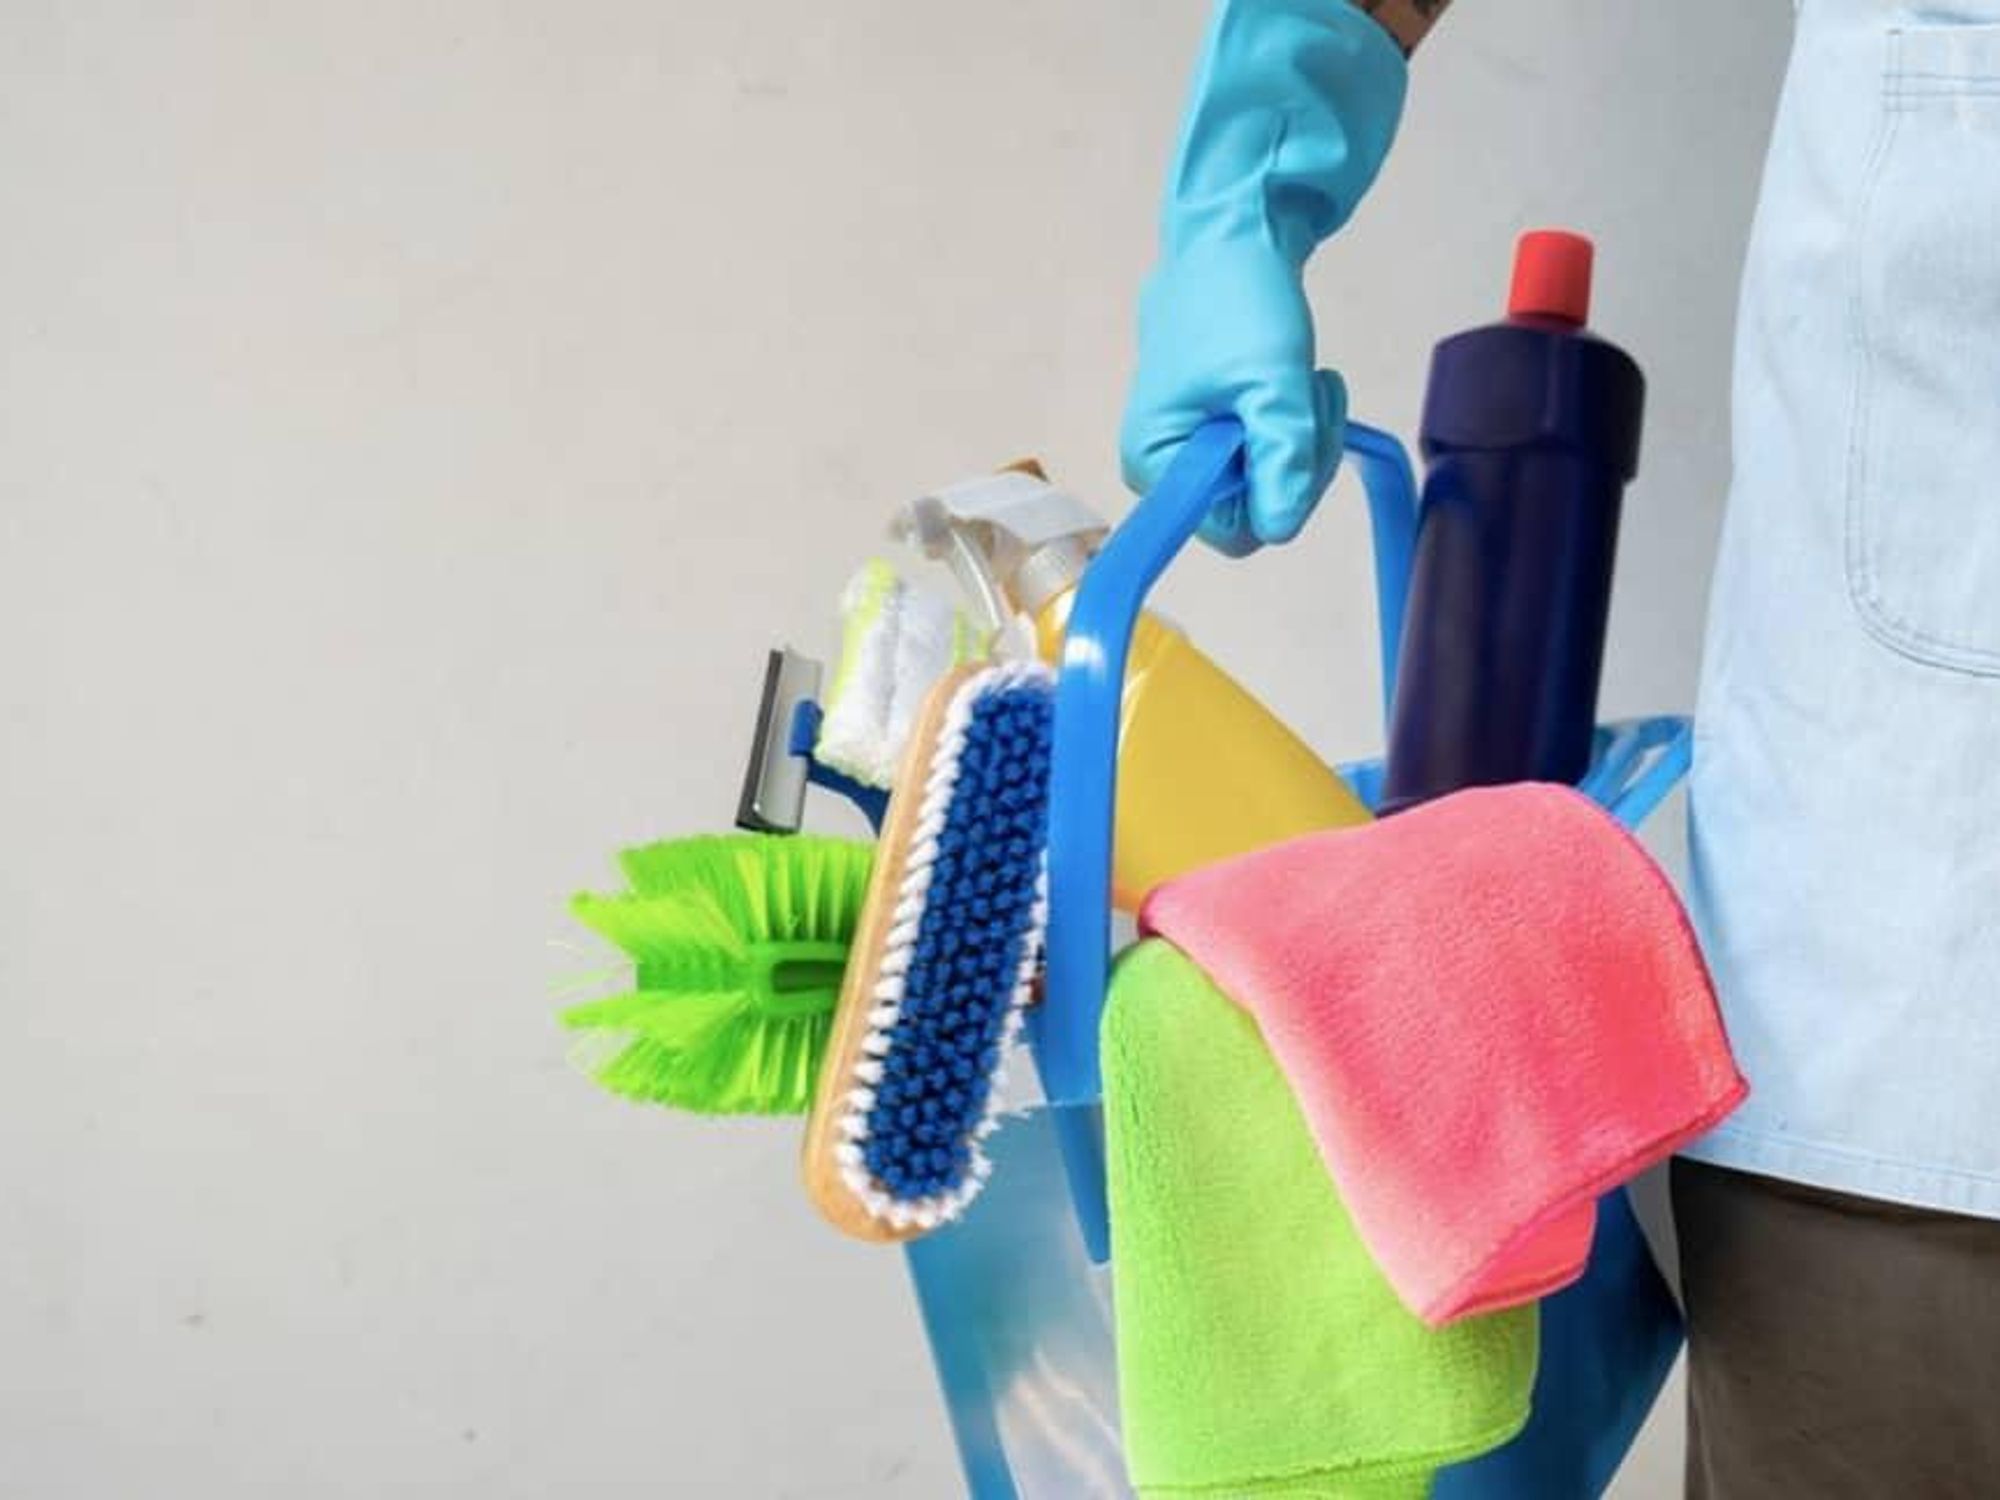 https://dallas.culturemap.com/media-library/cleaning-supplies-for-housekeeping.jpg?id=31489151&width=2000&height=1500&quality=85&coordinates=68%2C0%2C68%2C0